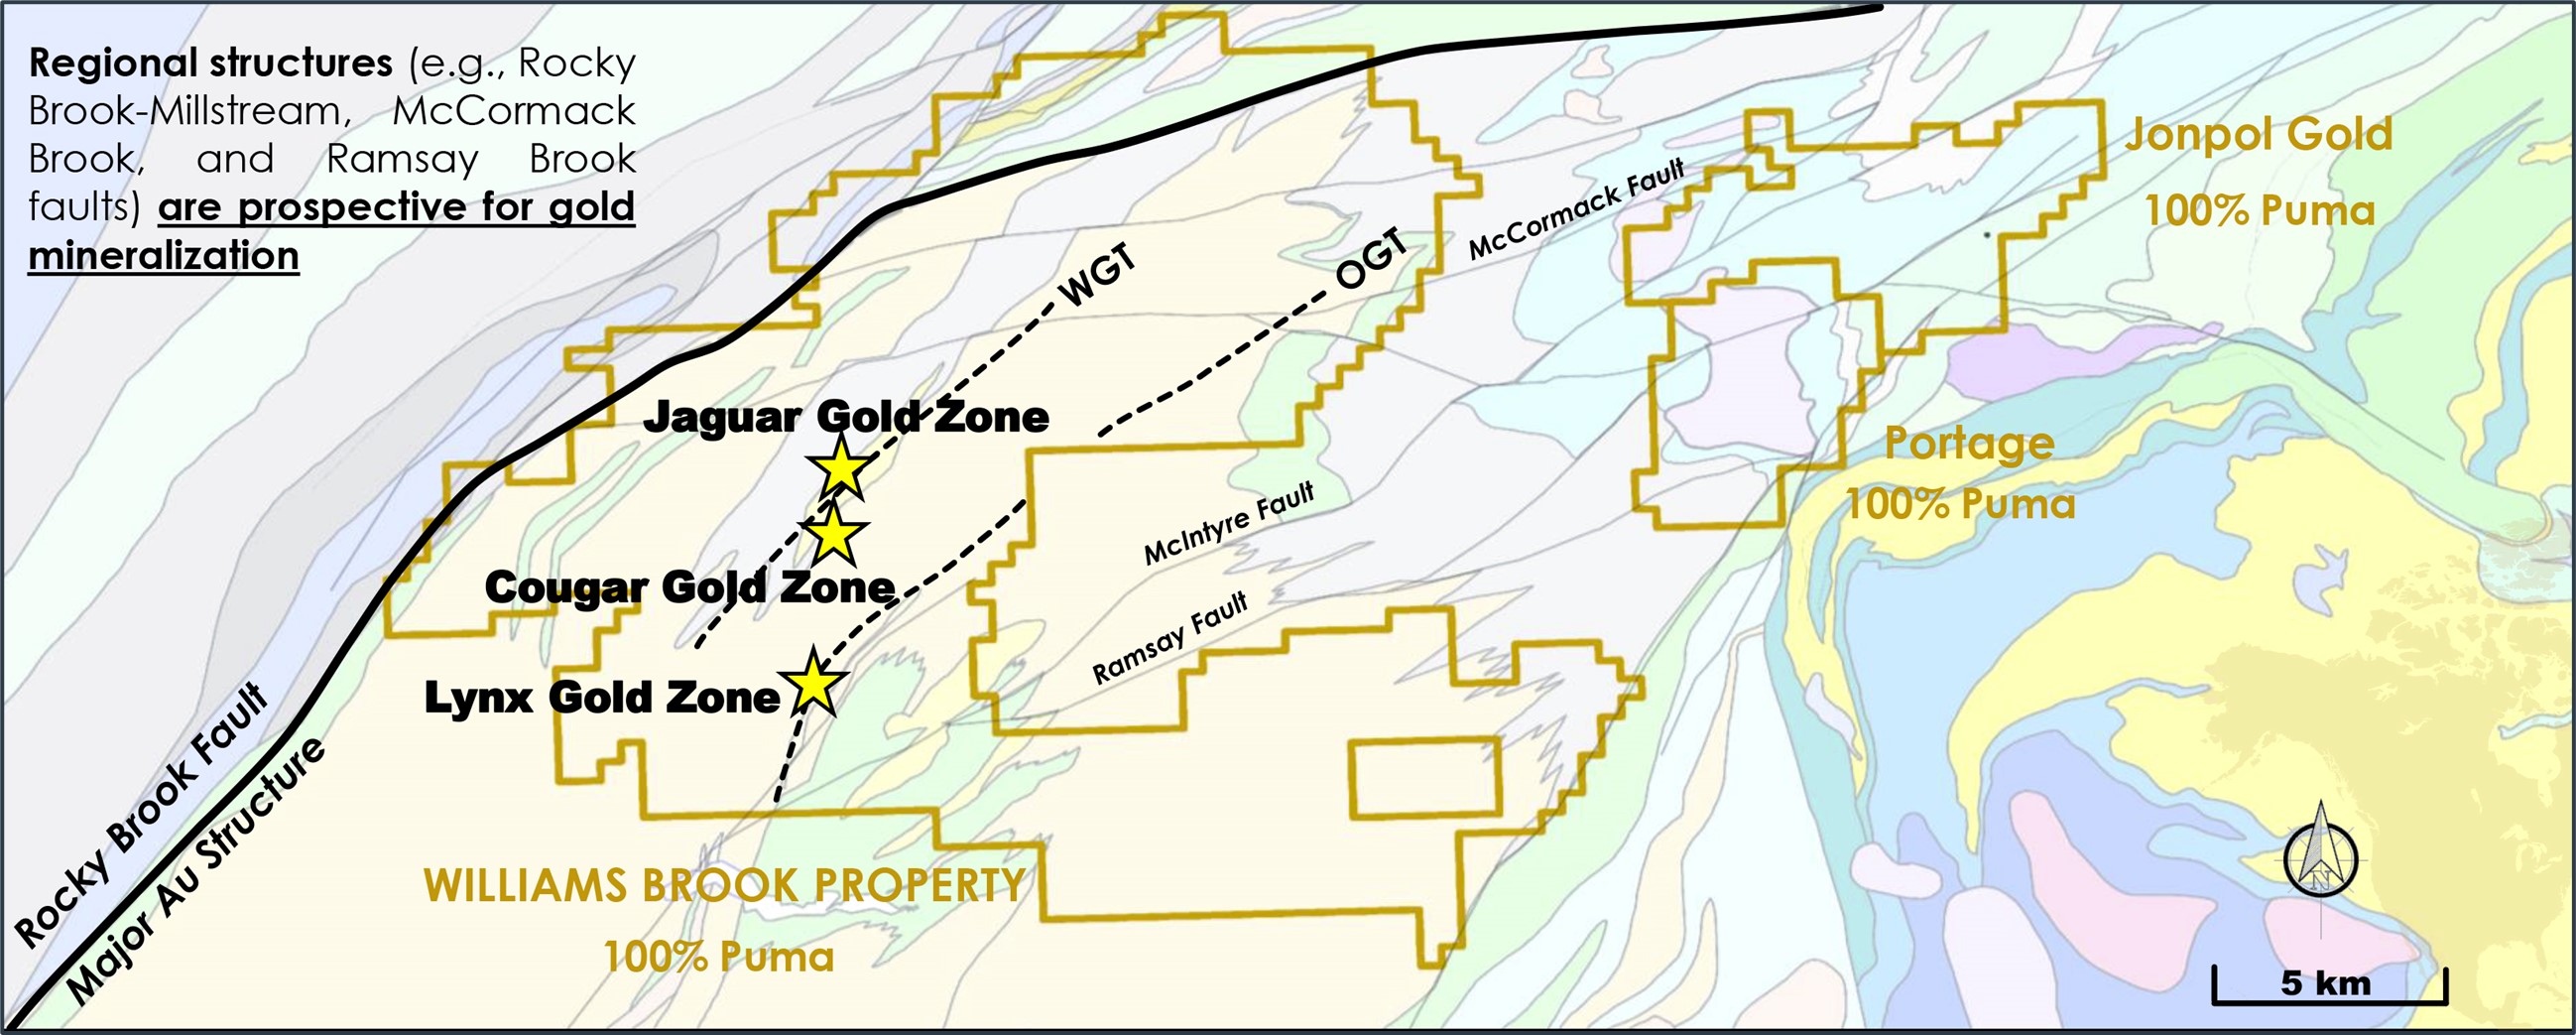 FIGURE 3: The Williams Brook Gold Project main zones